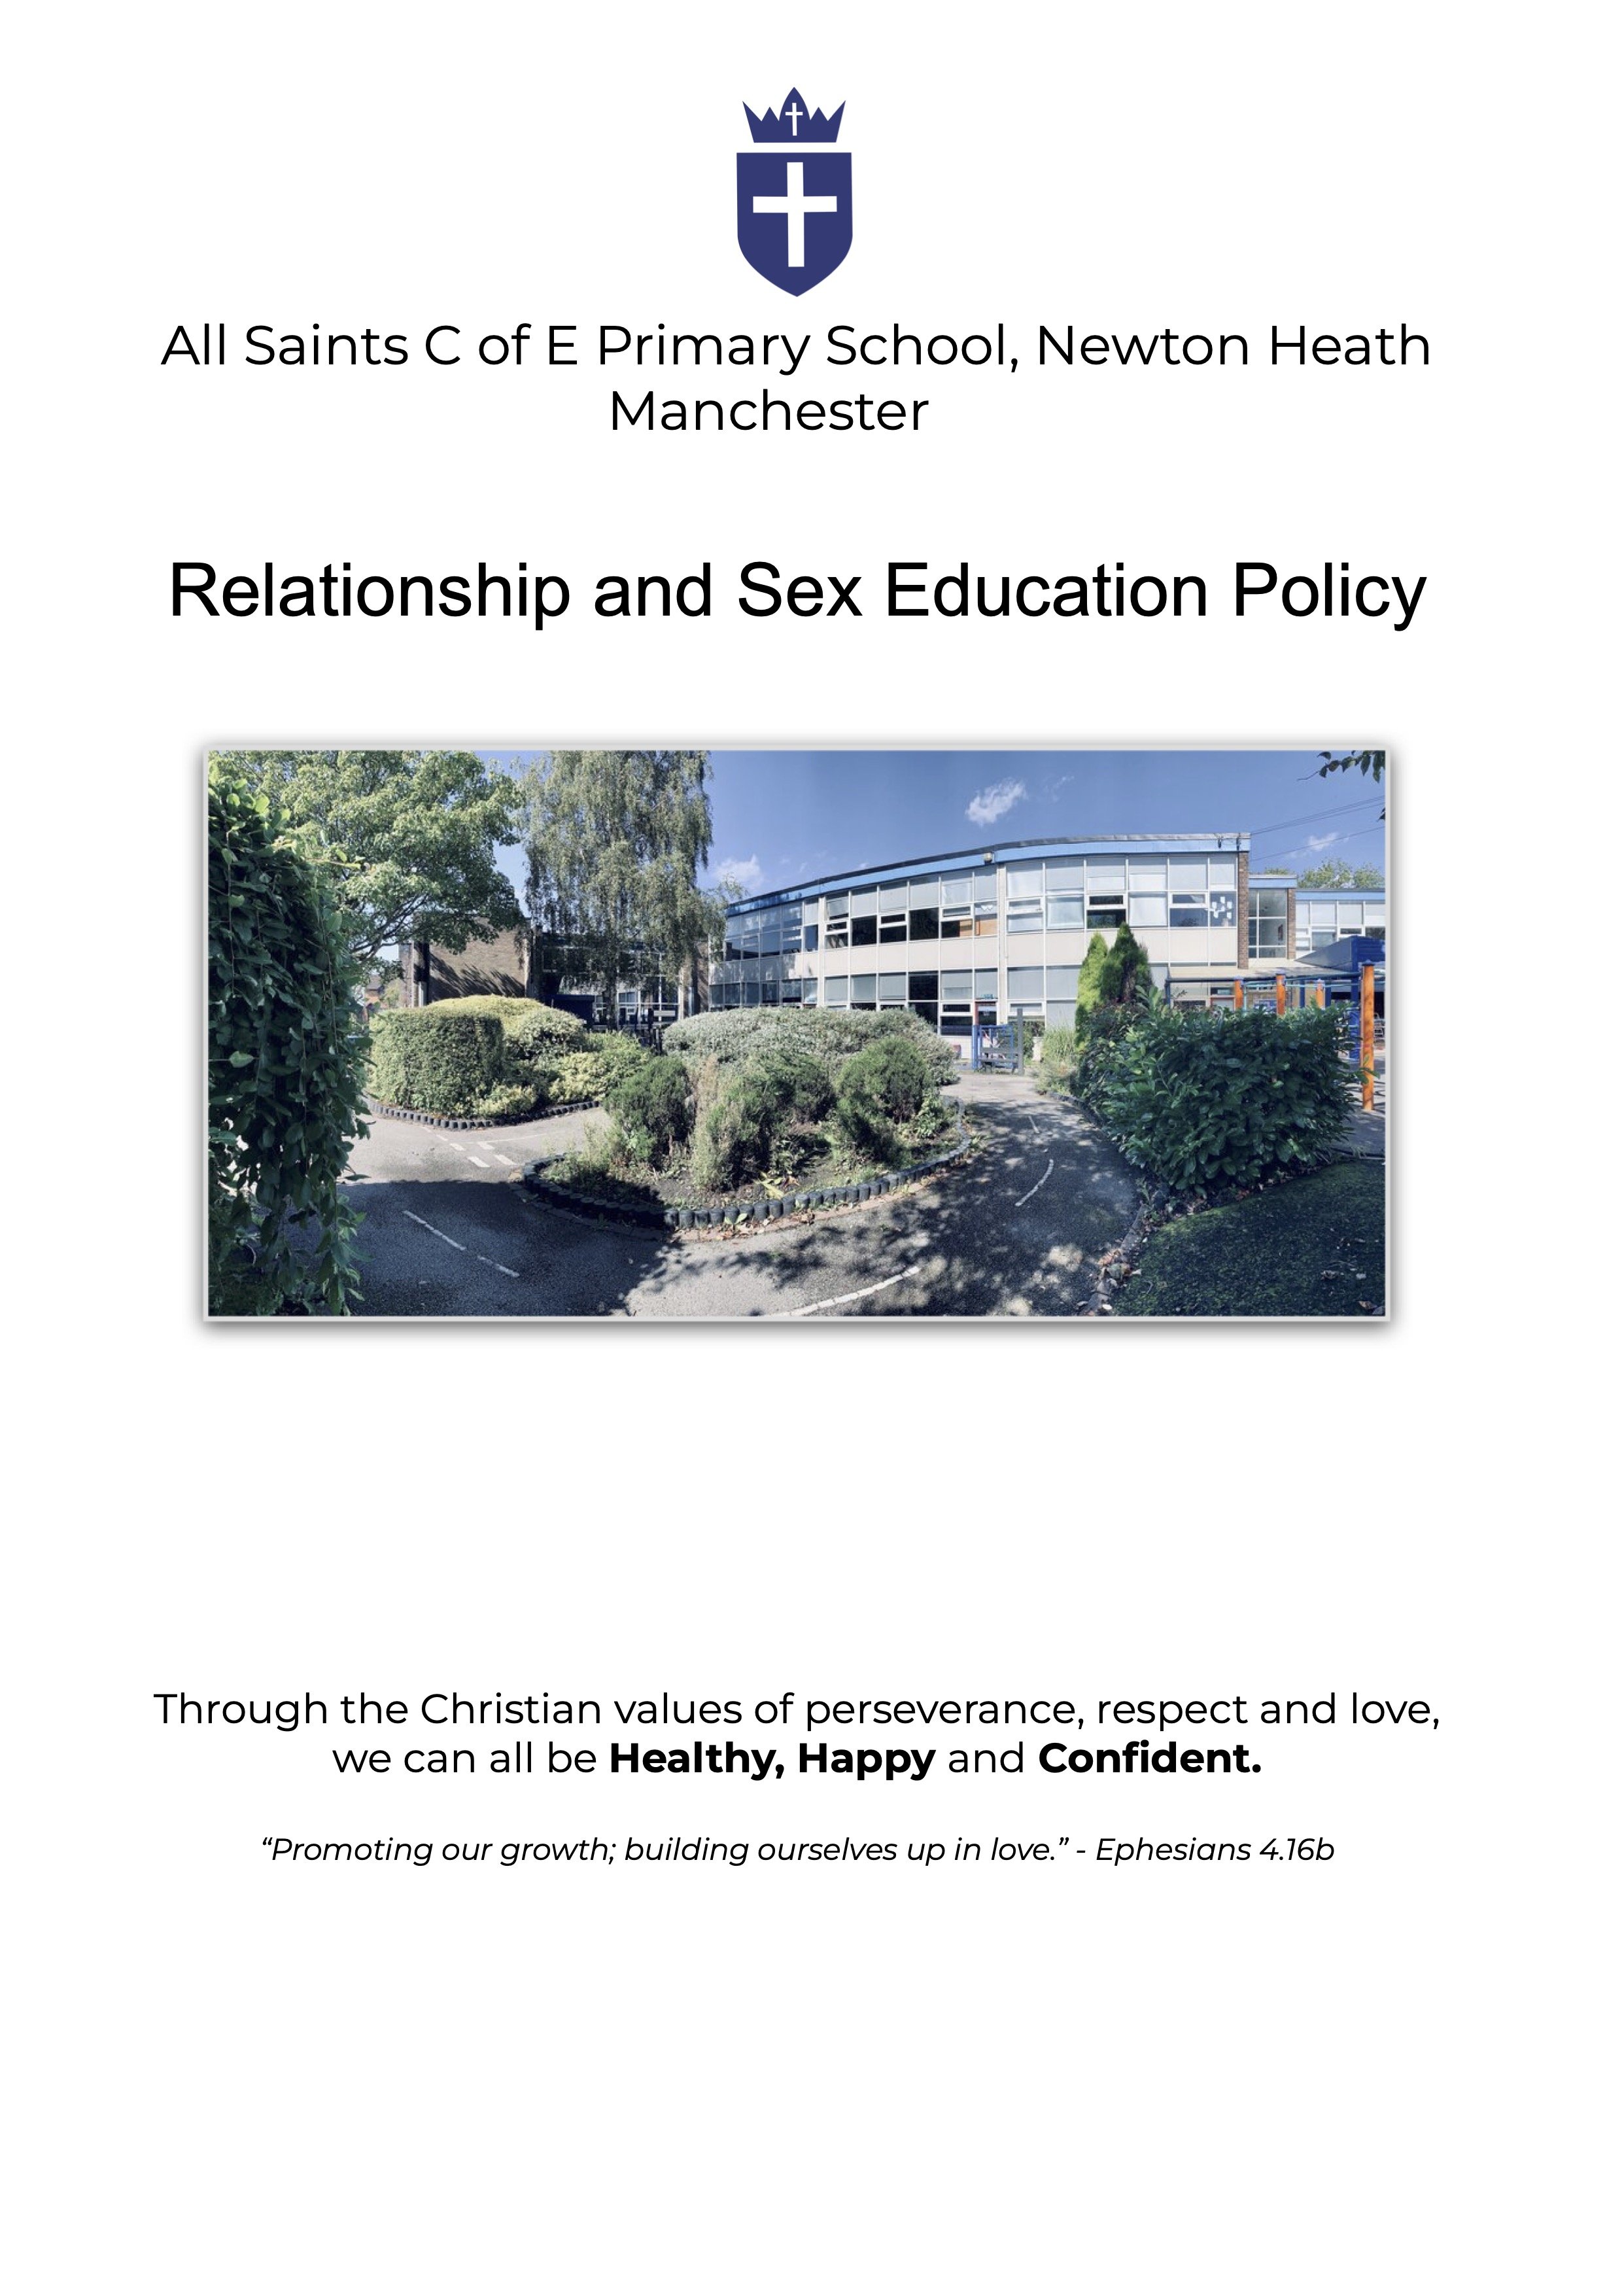 Relationship and Sex Education Policy .jpg